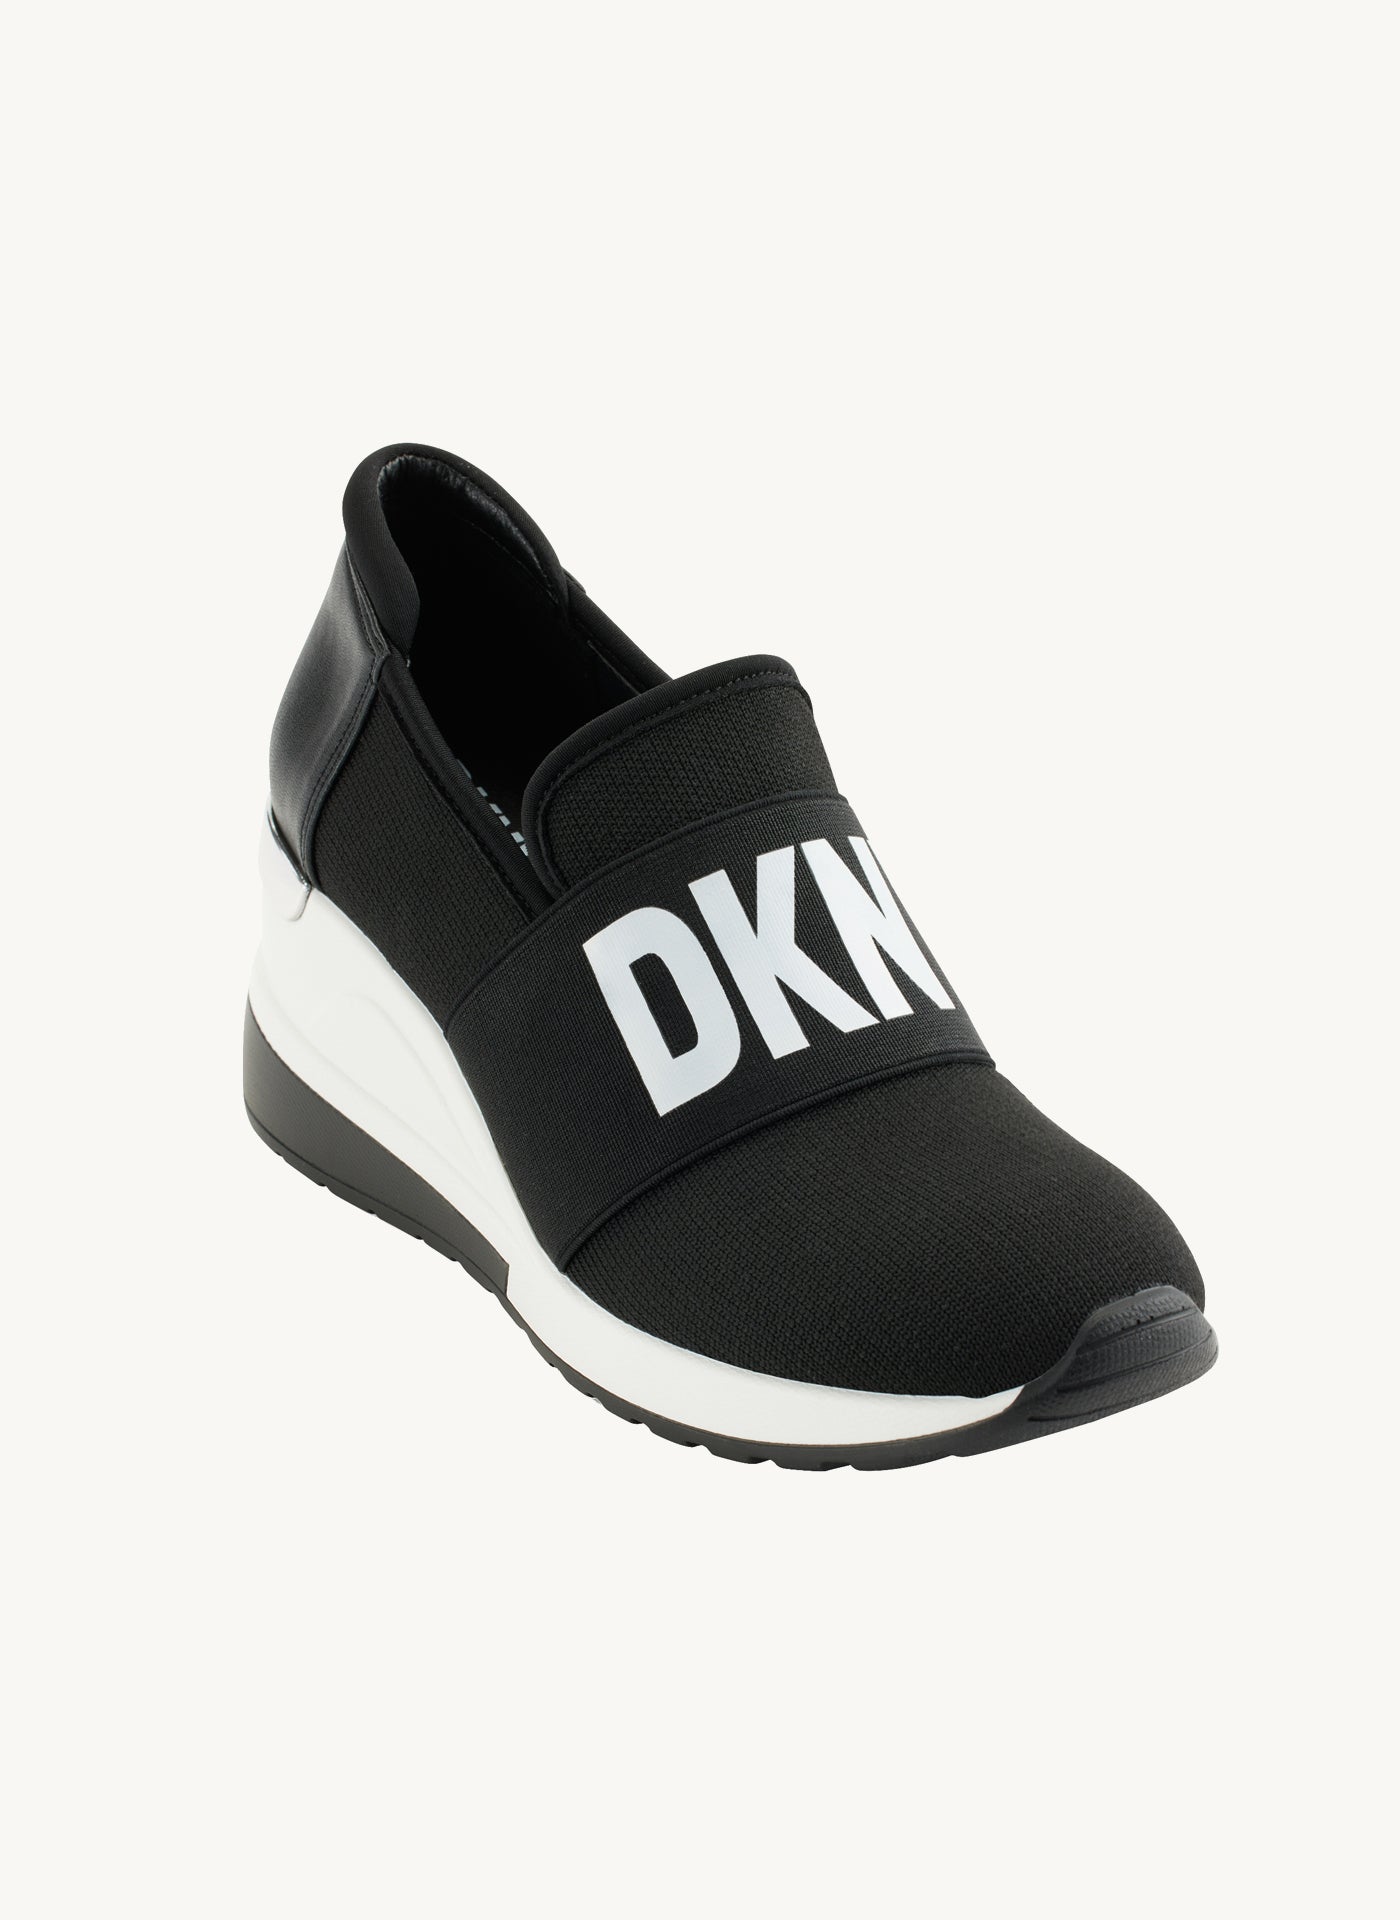 Cady - Wedges Sneakers